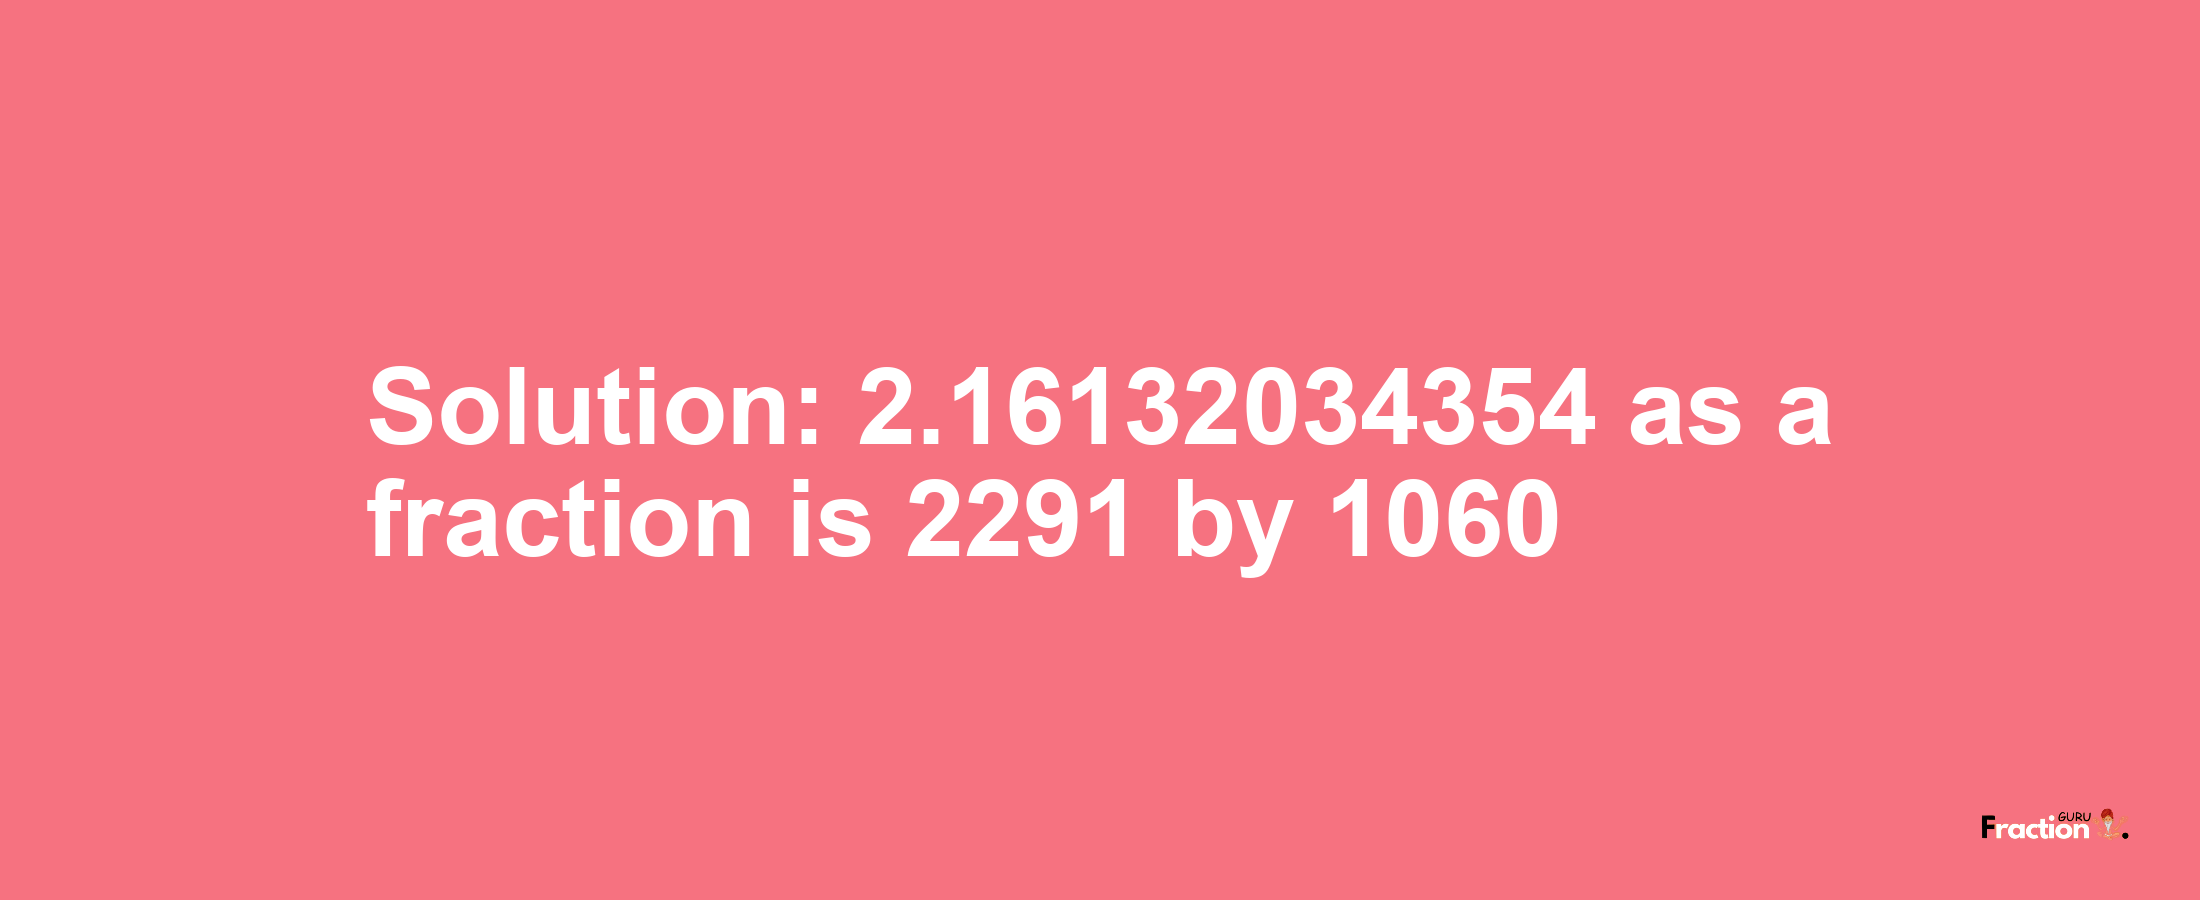 Solution:2.16132034354 as a fraction is 2291/1060